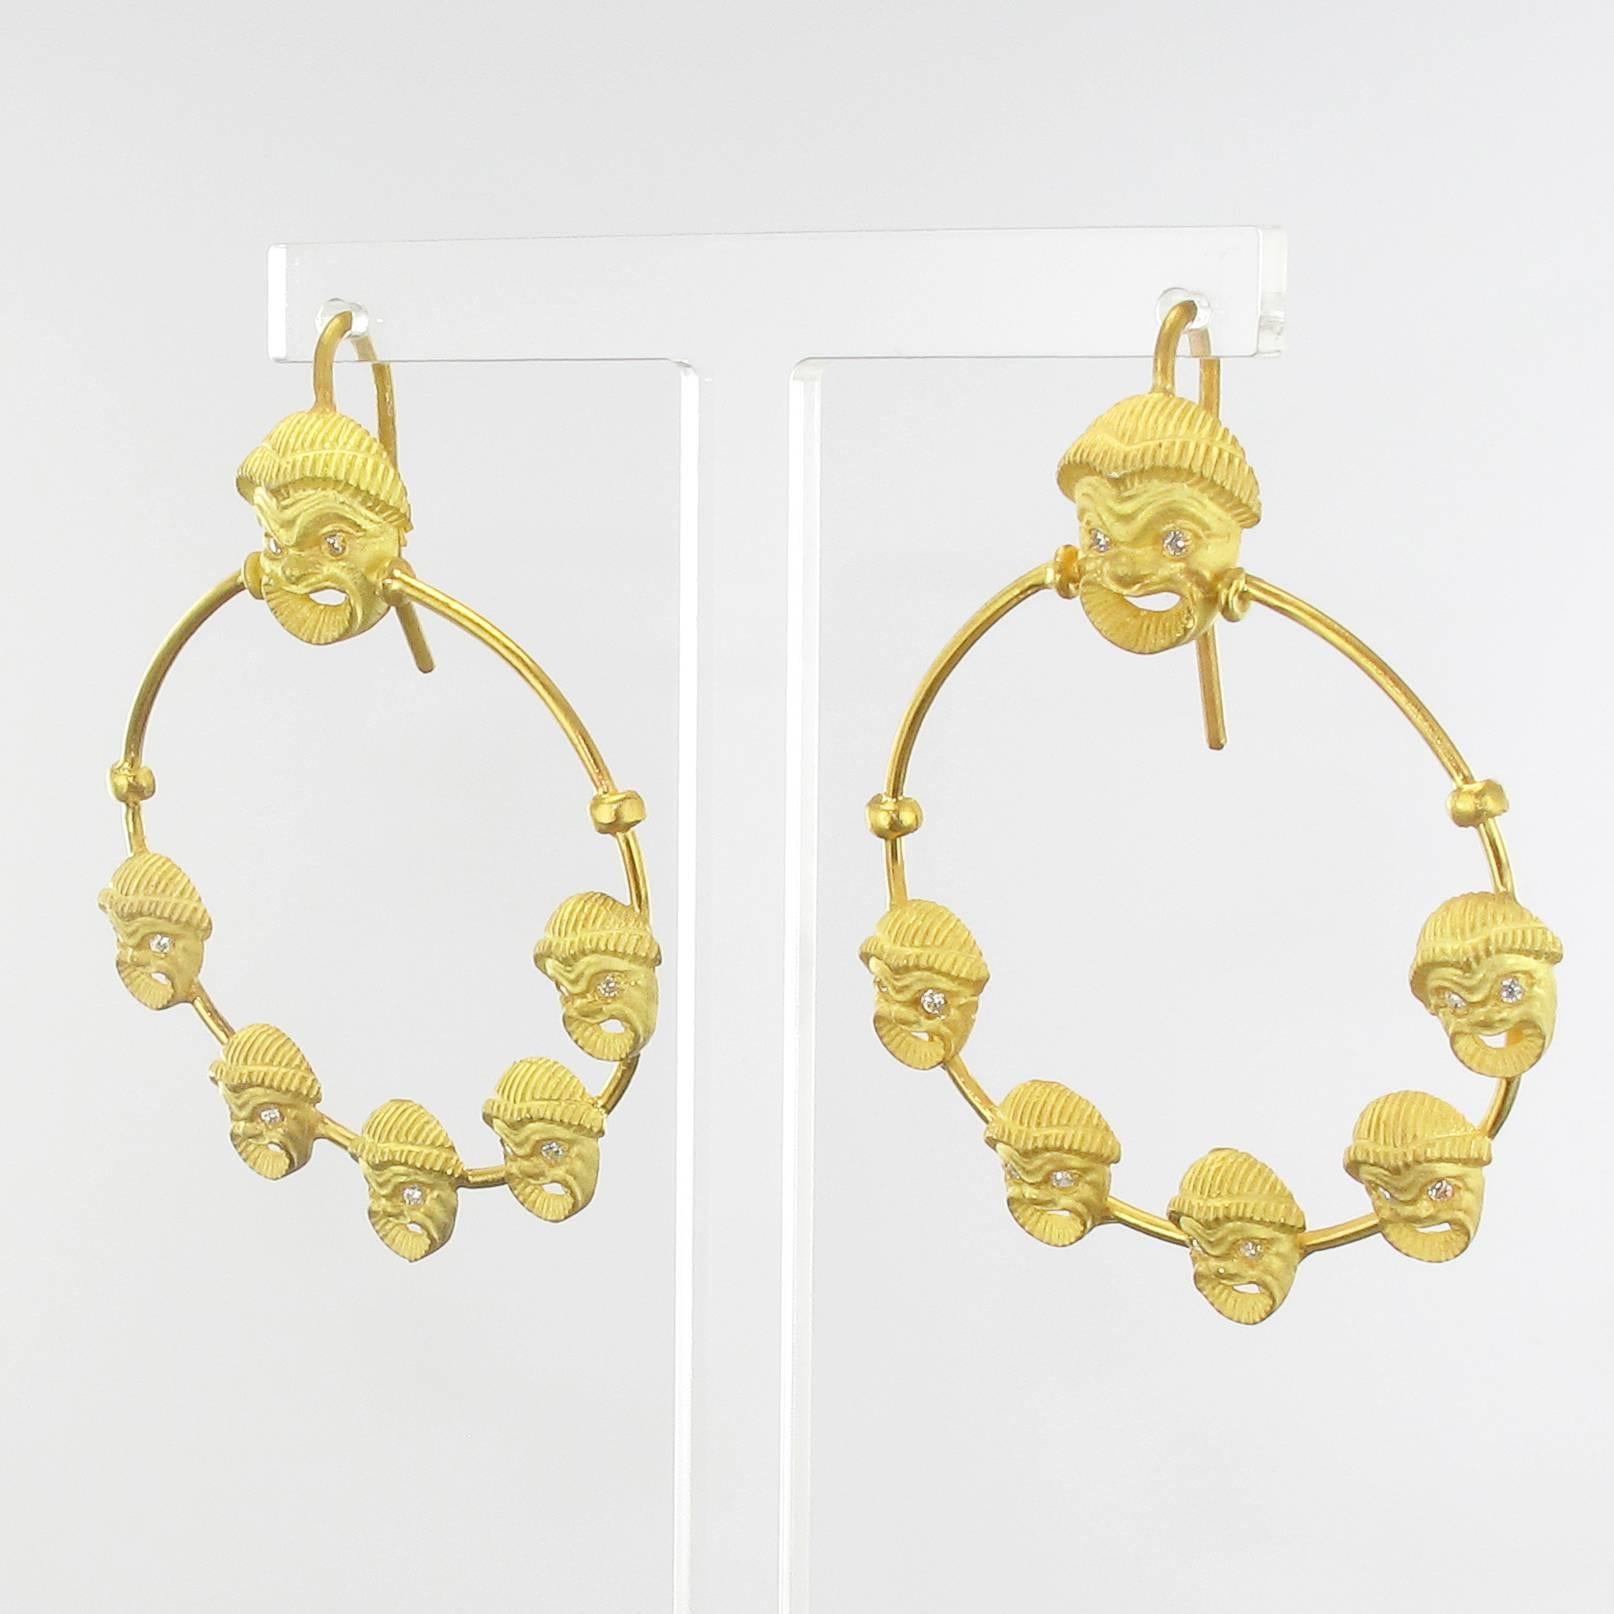 For pierced ears.
Earring in matte vermeil.
These splendid vermeil earrings are made of a delicately chiseled grinning mask whose eyes are set with small crystals. It retains a large gold ring set with applied same motif in mask. The hanging system